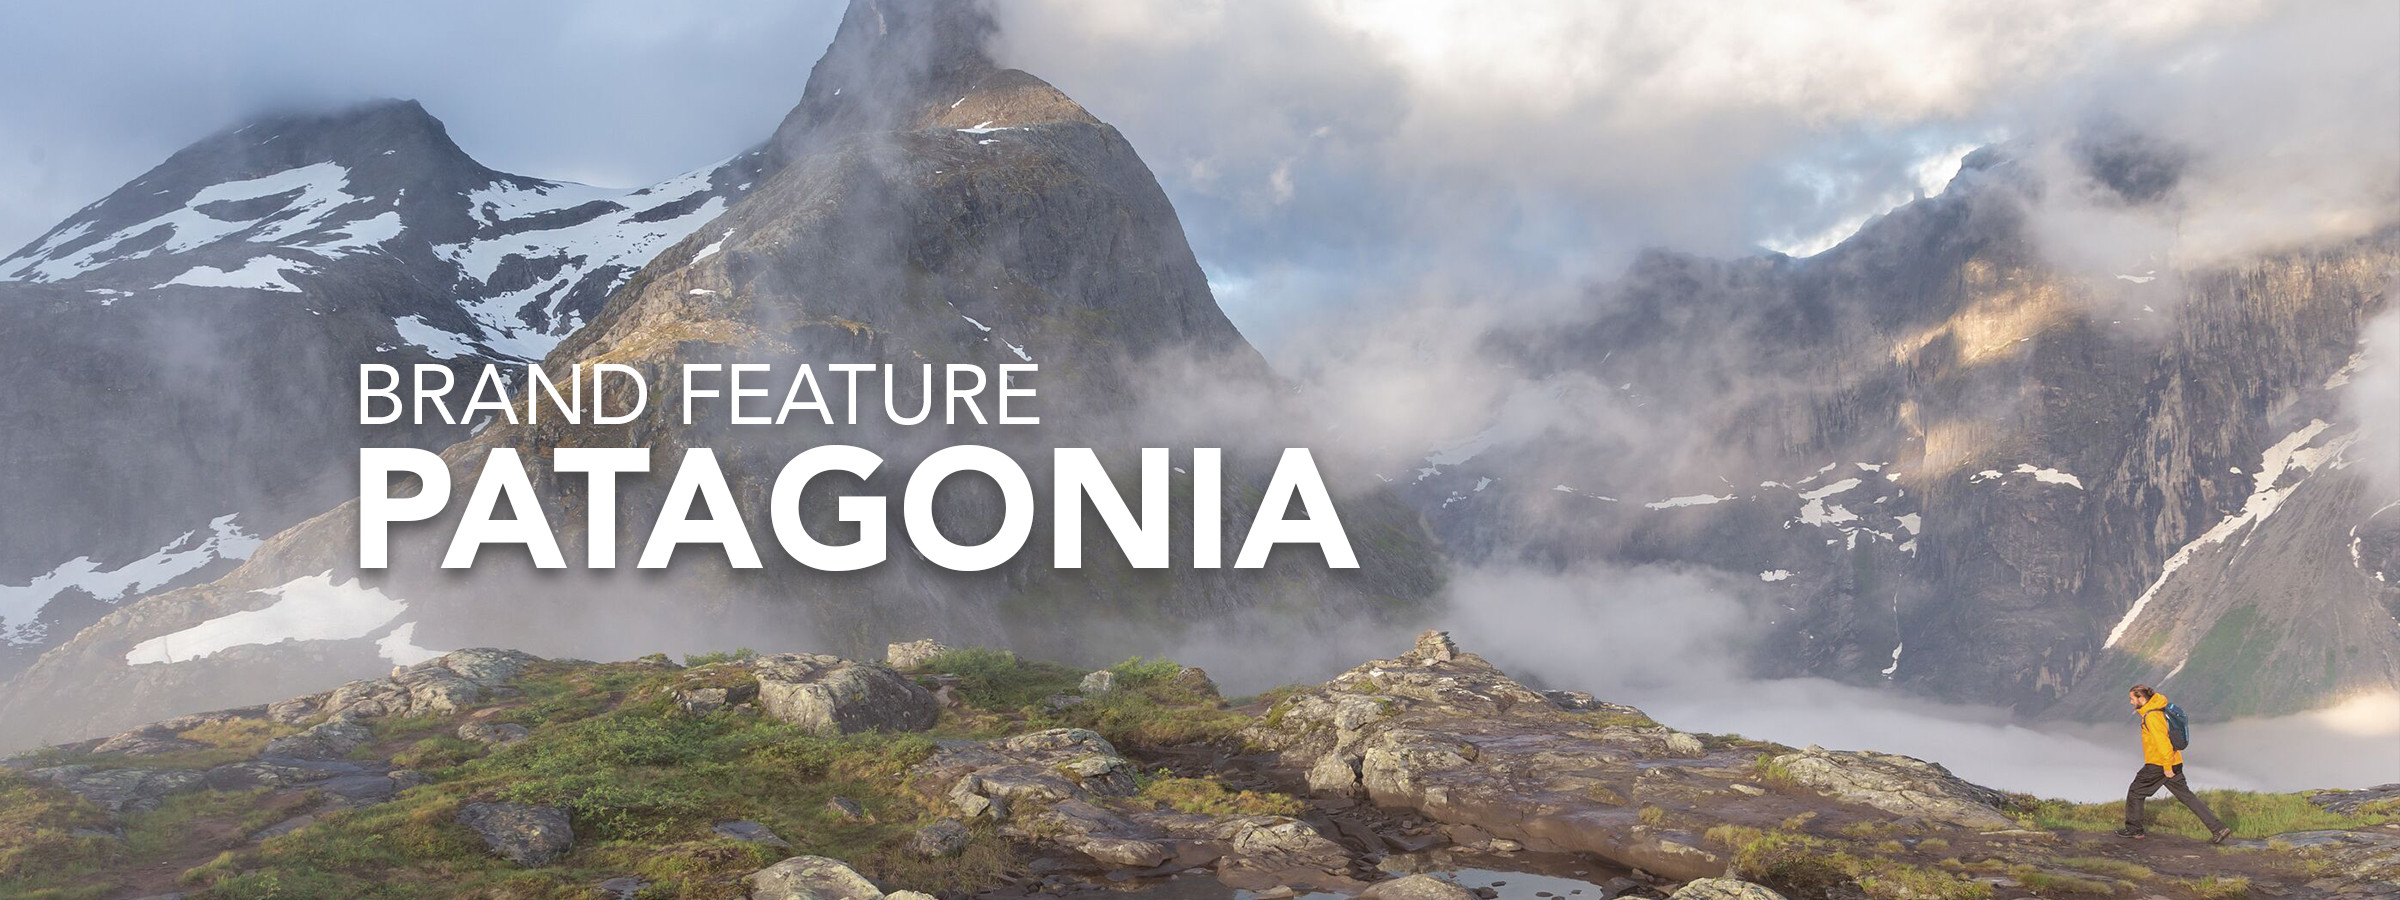 Brand Feature: Patagonia - “We're in business to save our home planet” -  River & Trail Outdoor Company